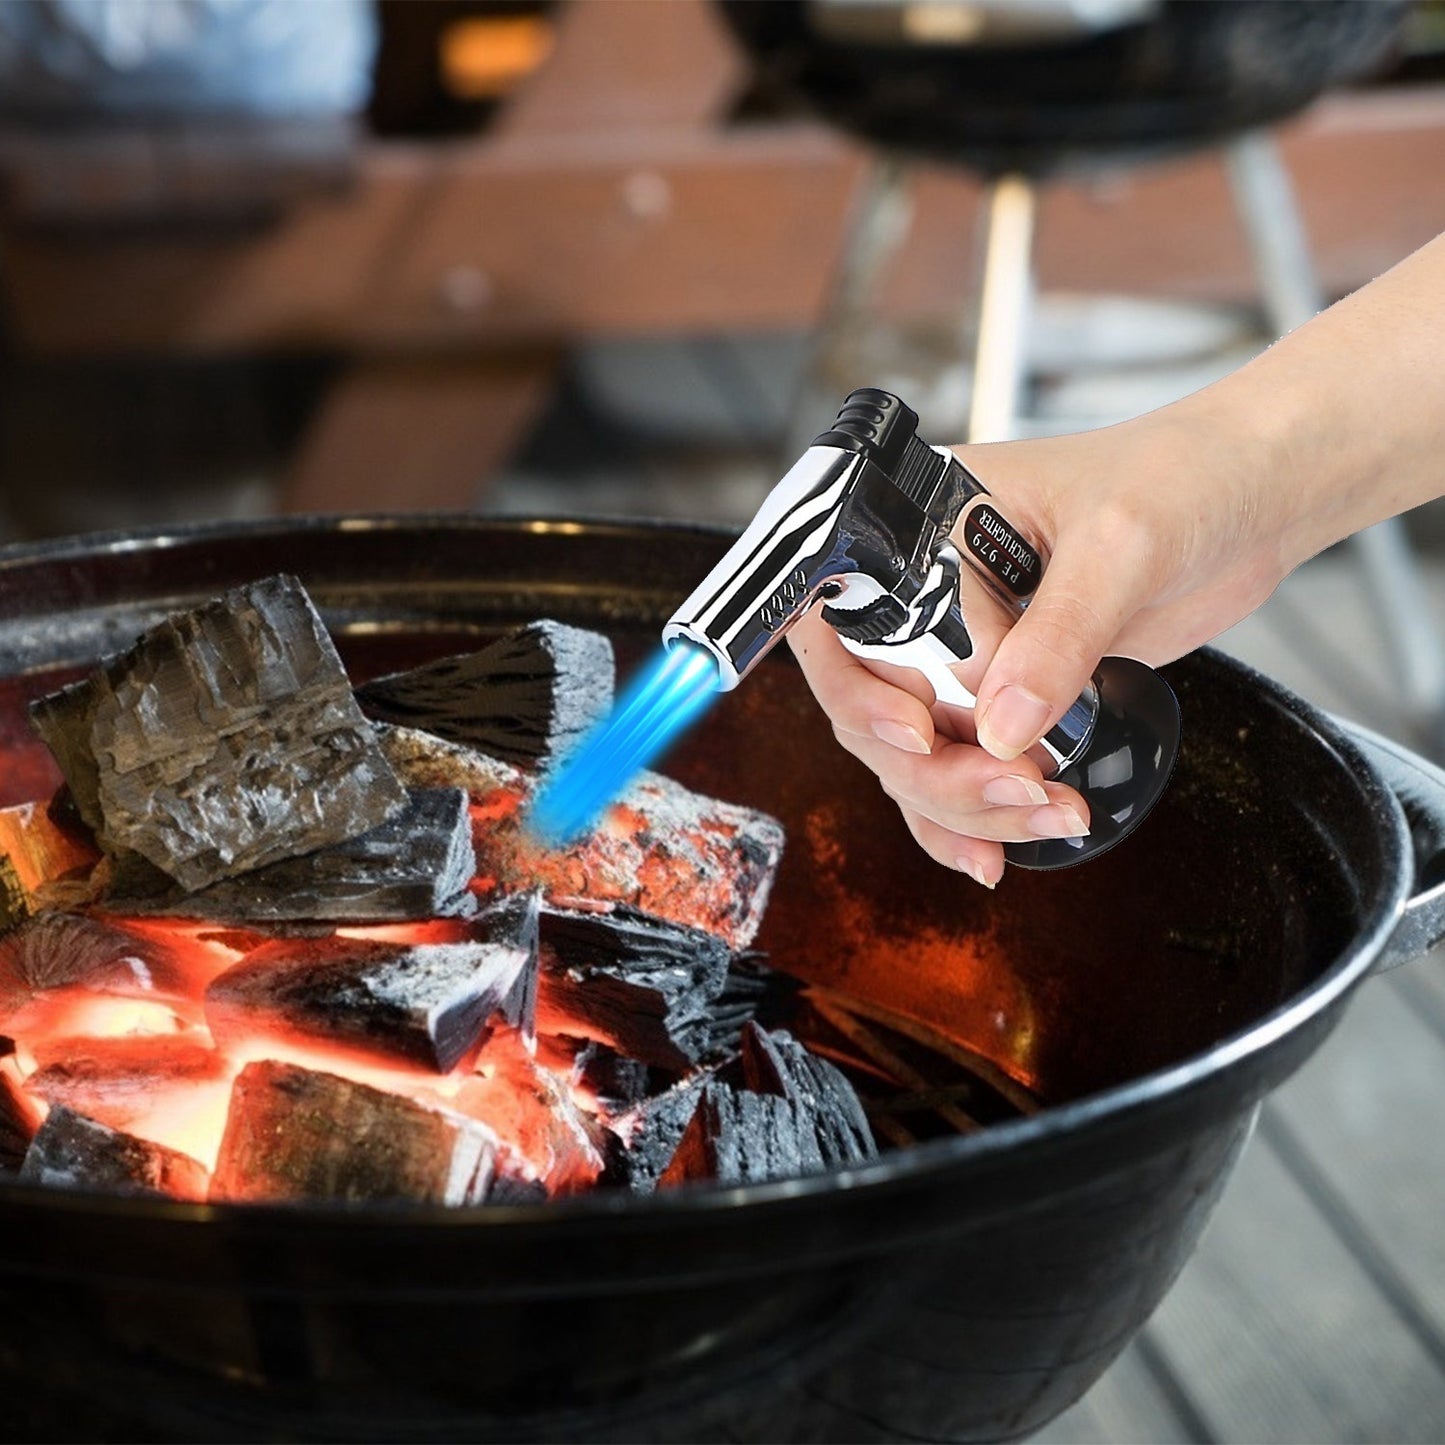 Culinary Butane Torch Lighter - Kitchen Cooking BBQ Torch  (Gas Not Included)